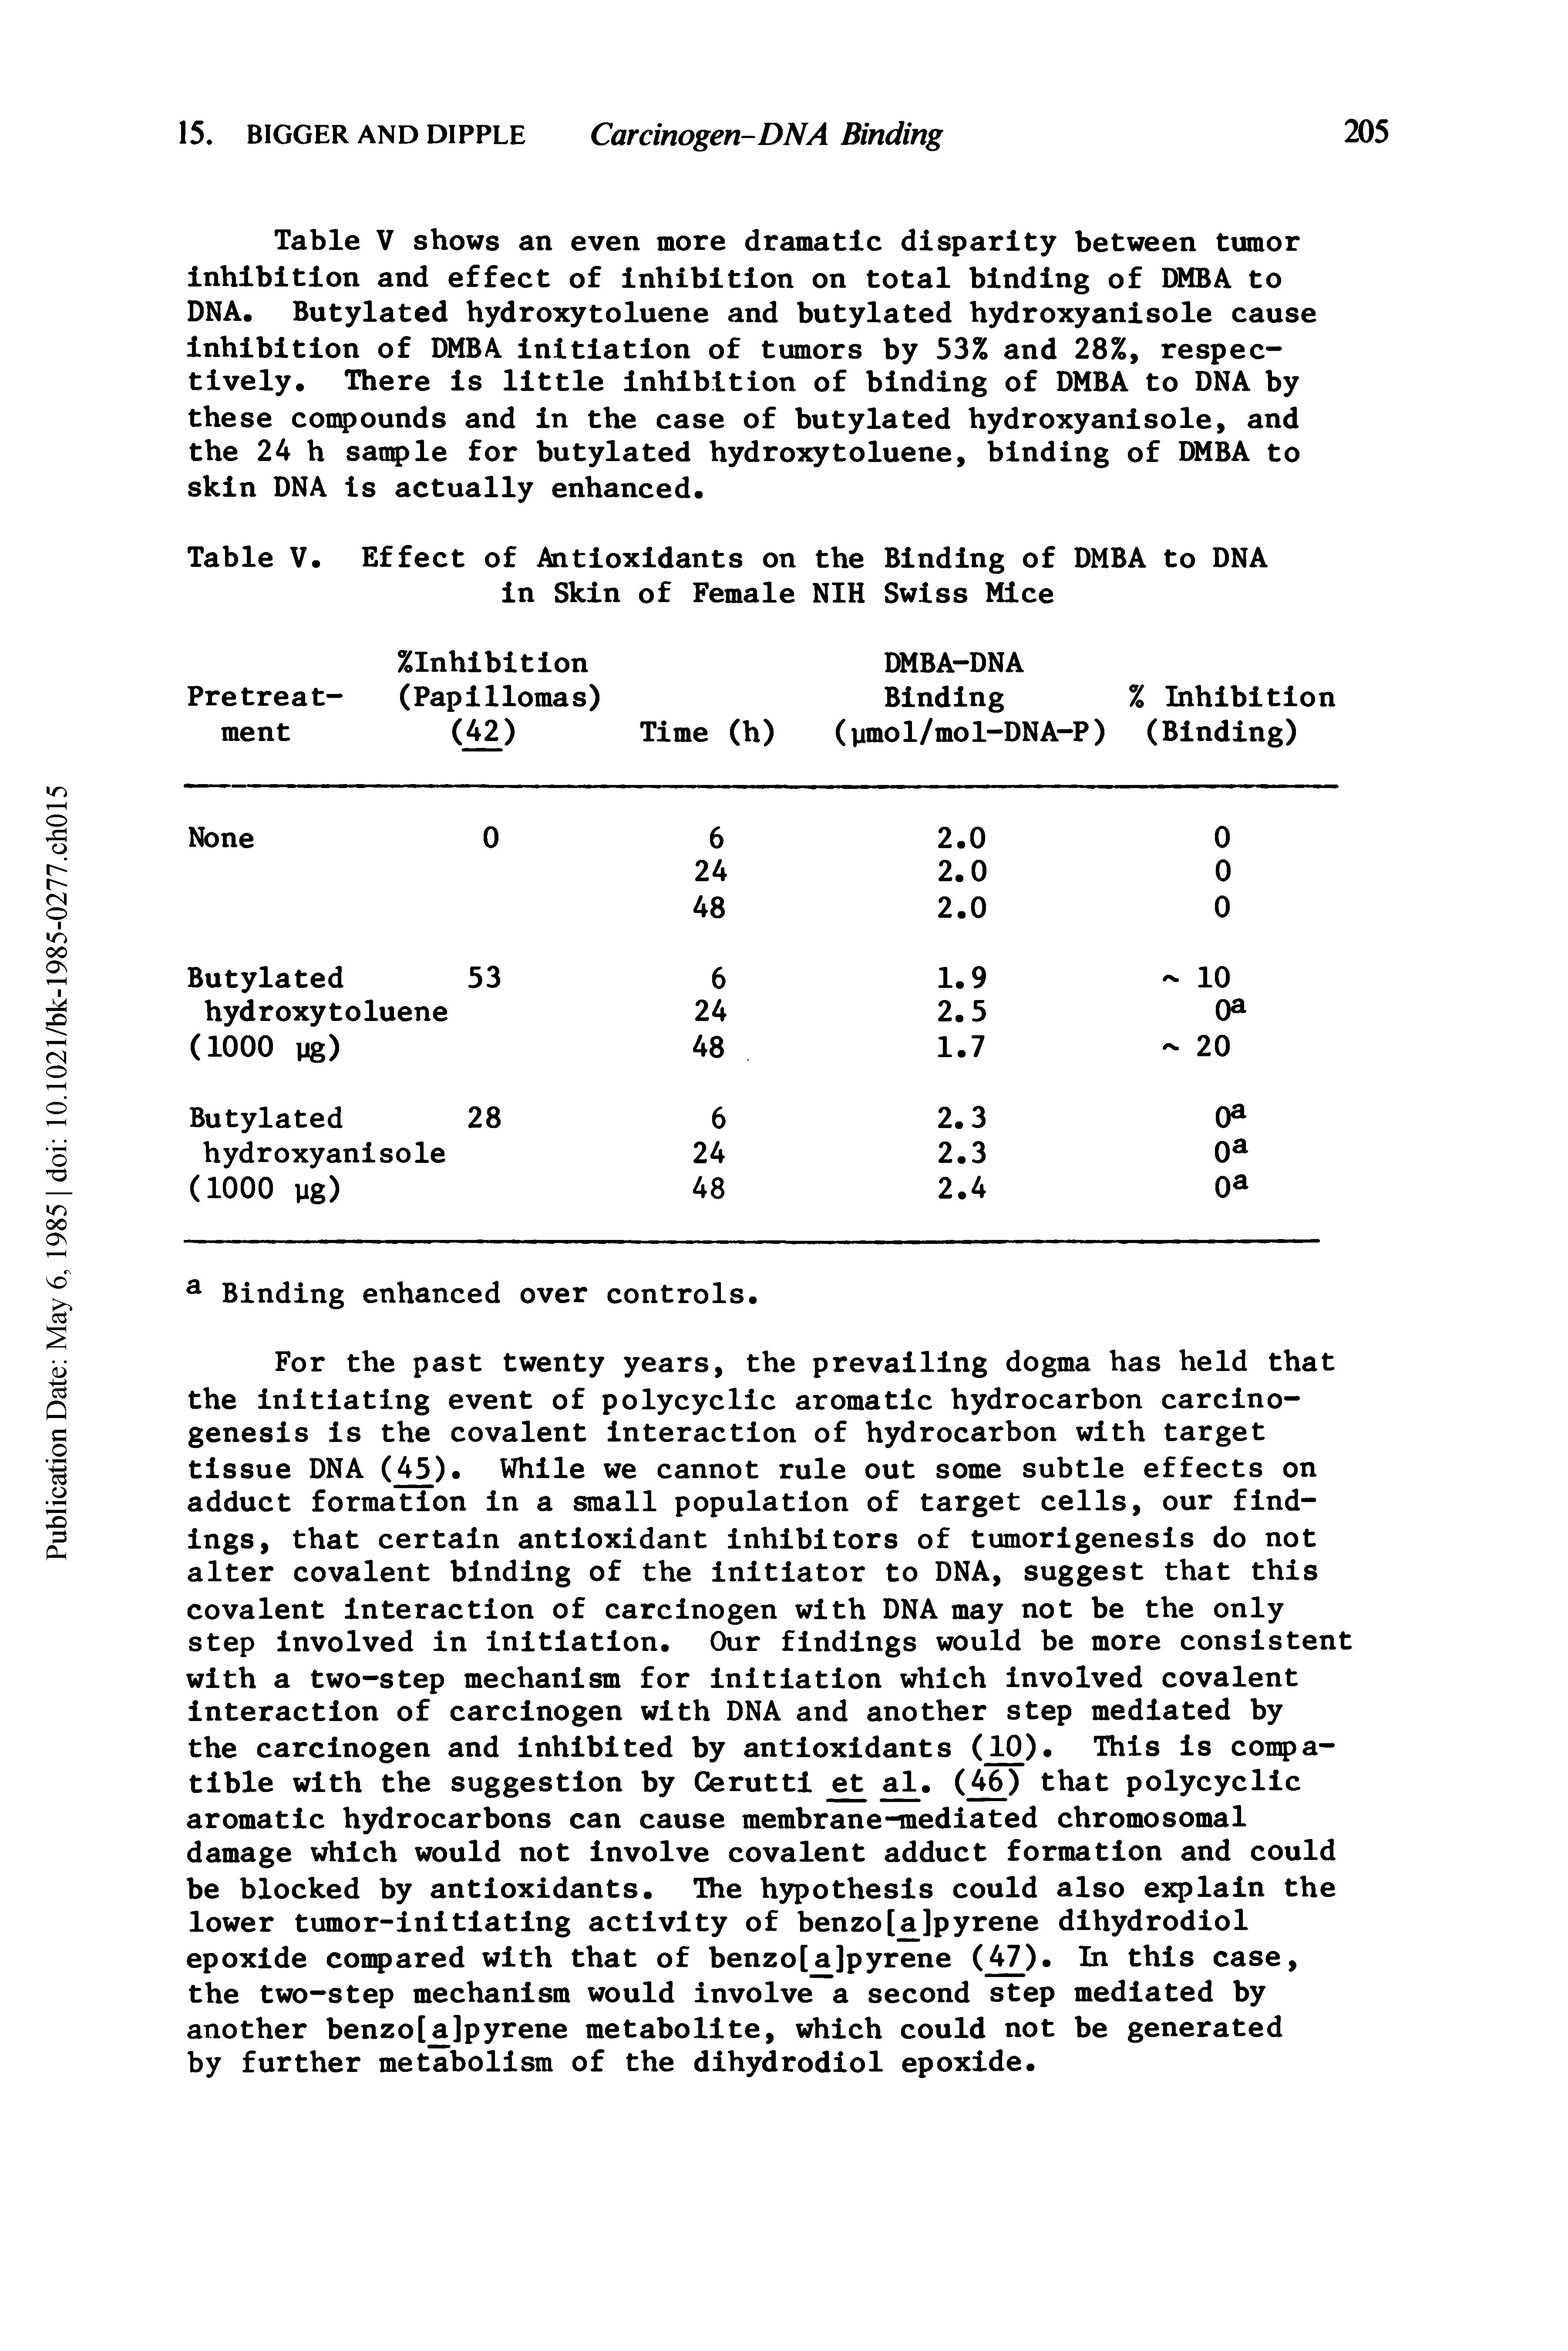 Table V shows an even more dramatic disparity between tumor inhibition and effect of inhibition on total binding of DMBA to DNA. Butylated hydroxytoluene and butylated hydroxyanisole cause inhibition of DMBA initiation of tumors by 53% and 28%, respectively. There is little inhibition of binding of DMBA to DNA by these compounds and in the case of butylated hydroxyanisole, and the 24 h sample for butylated hydroxytoluene, binding of DMBA to skin DNA is actually enhanced.